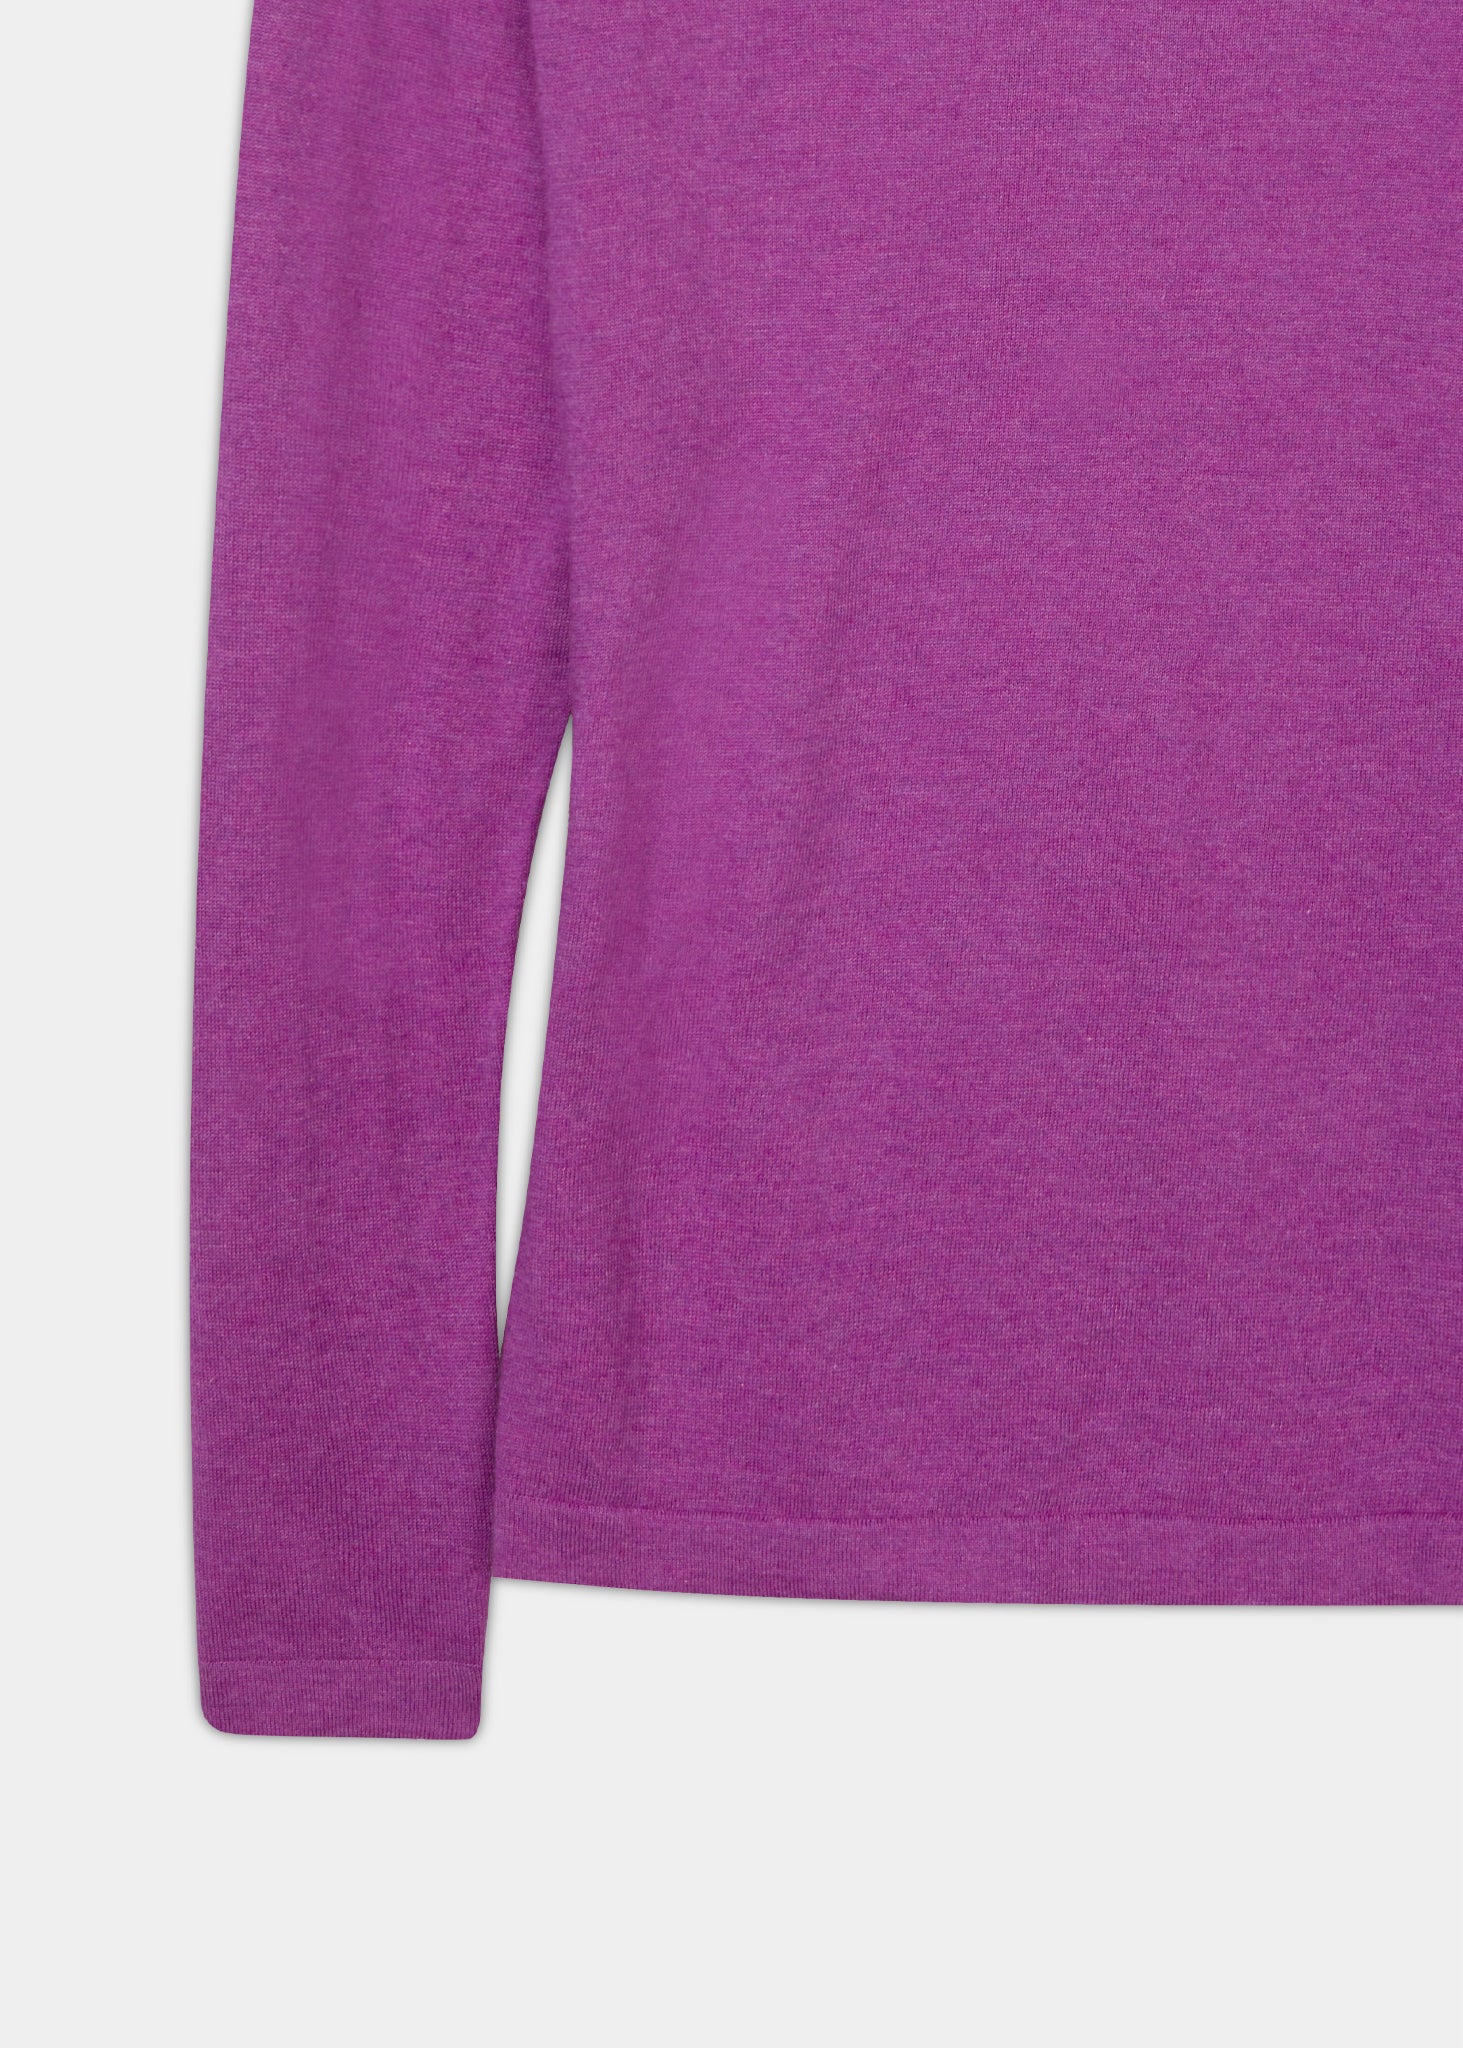 Alan Paine ladies cotton cashmere jumper in colourway orchid with a crew neck